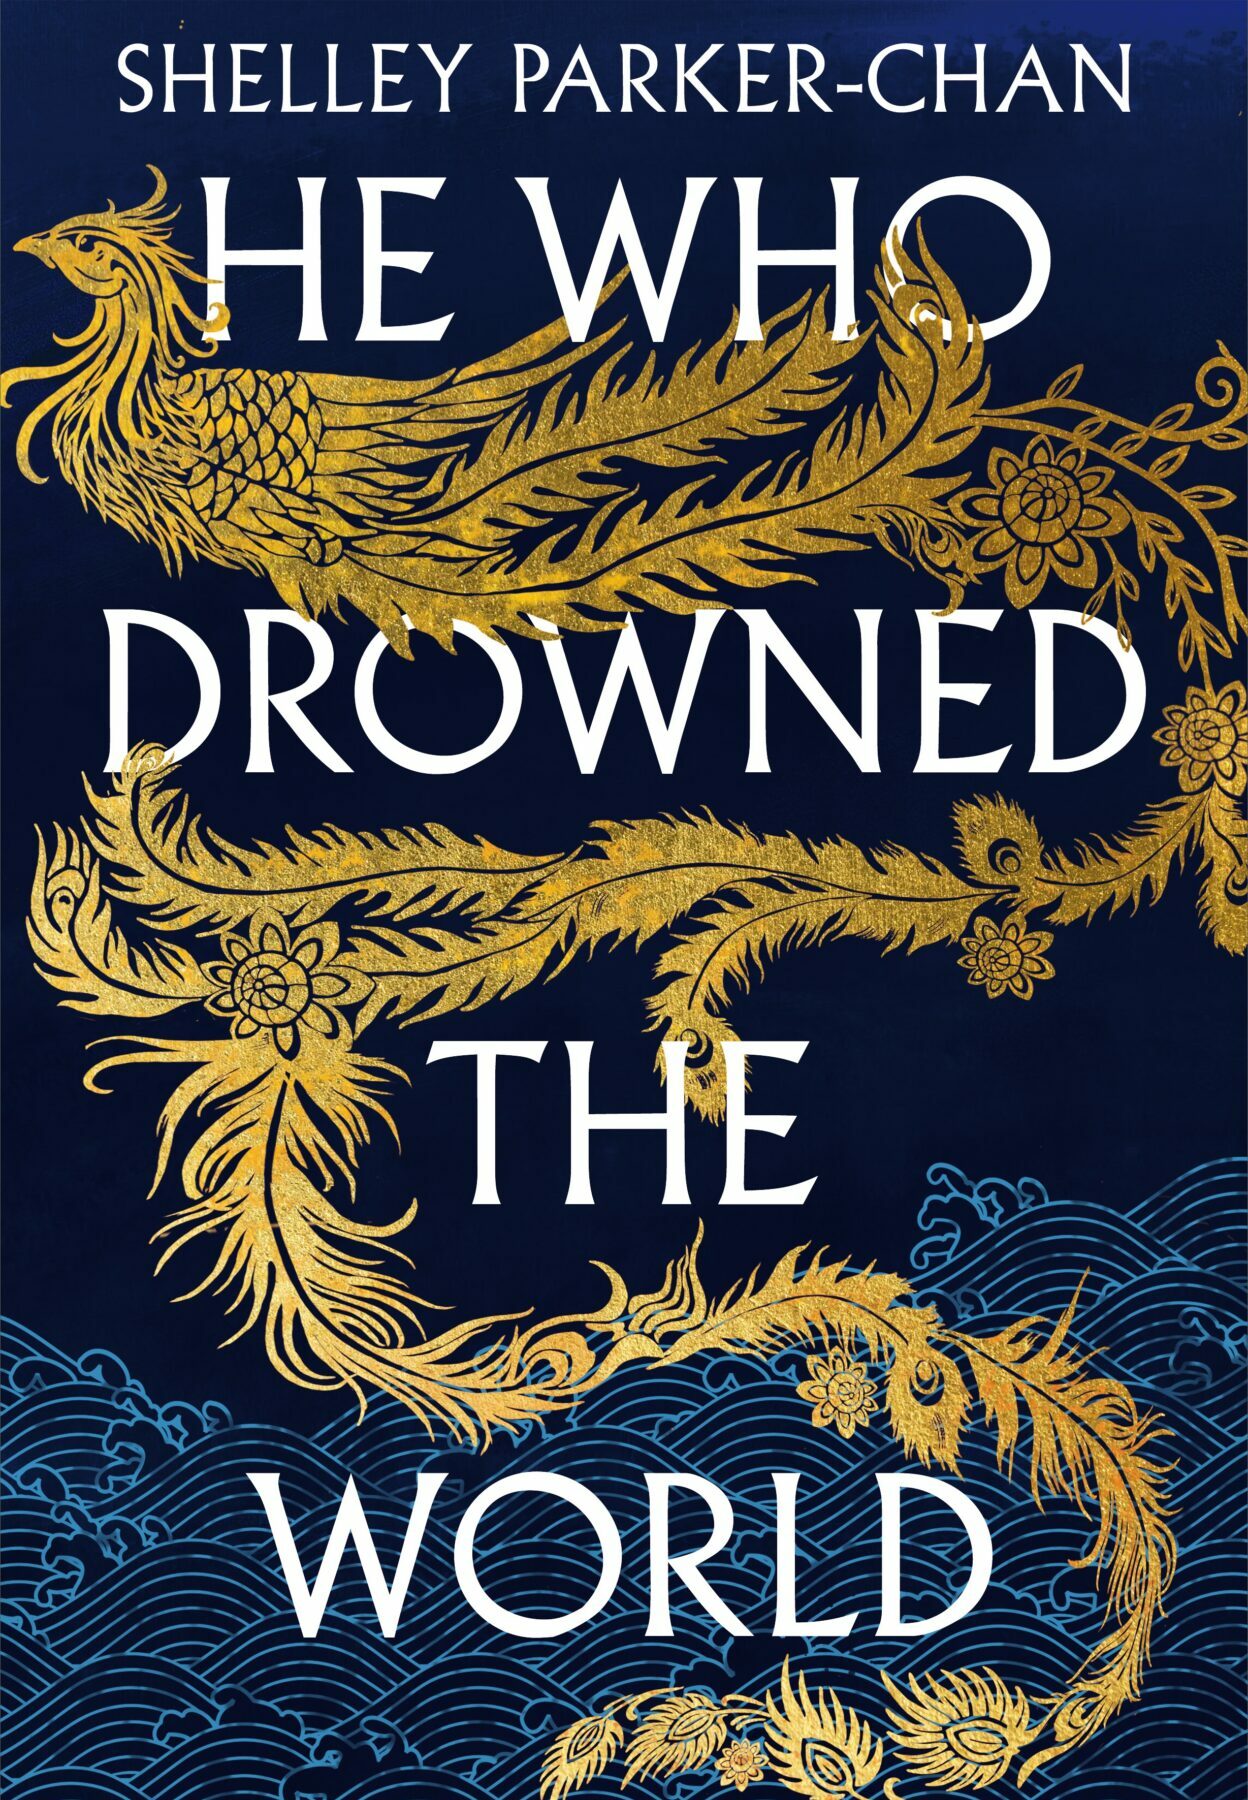 A blue book cover with the title in white block letters spanning the length of the page, intertwined with an illustration of a gold bird with a very long flowing tail